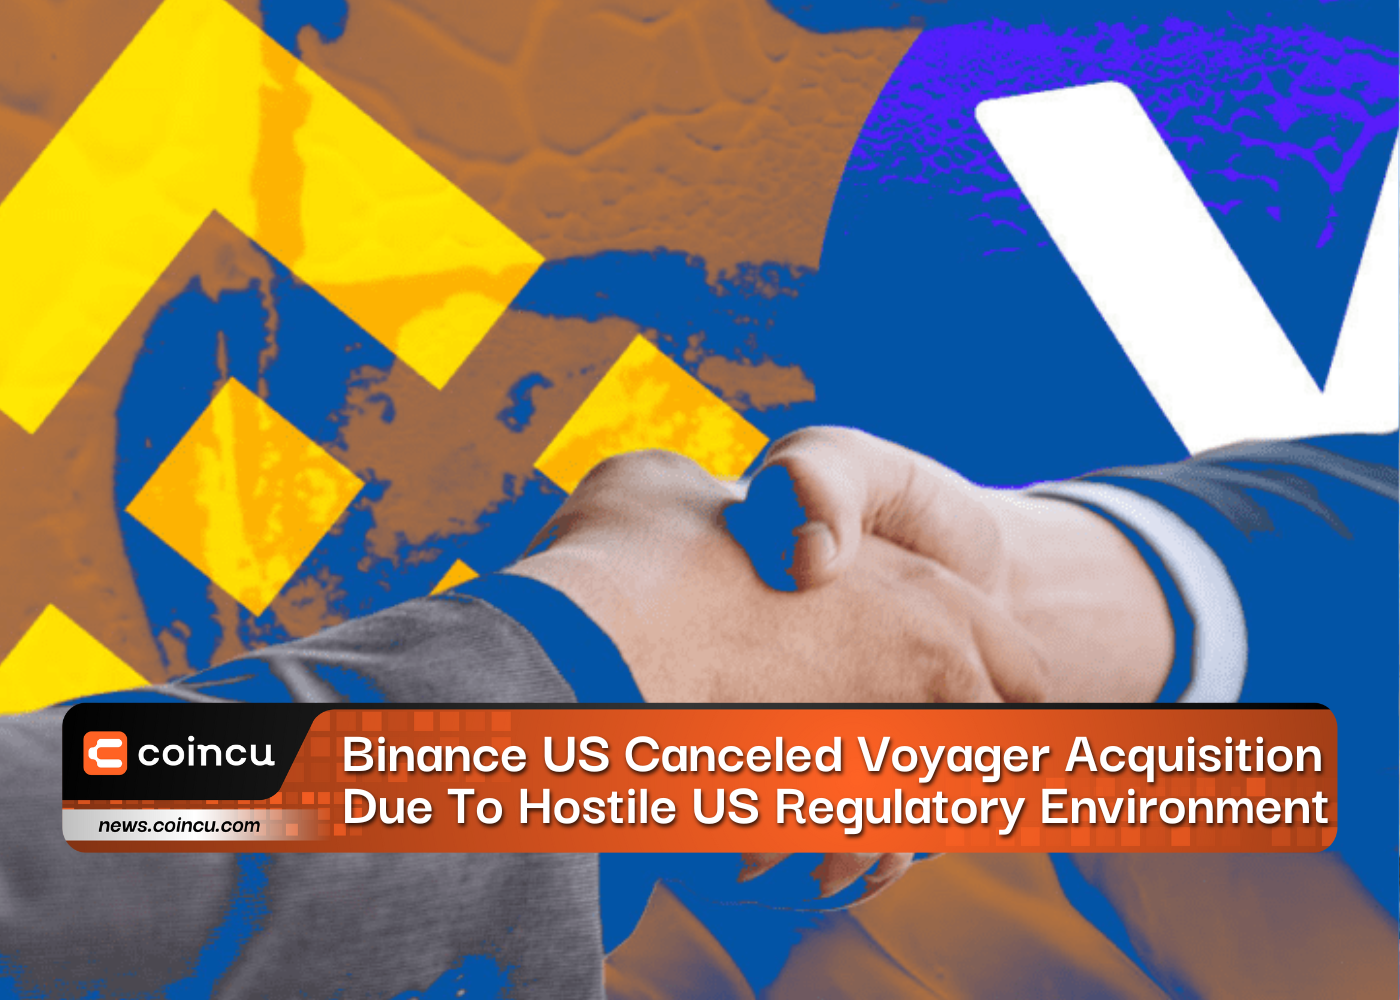 Binance US Canceled Voyager Acquisition Due To Hostile US Regulatory Environment